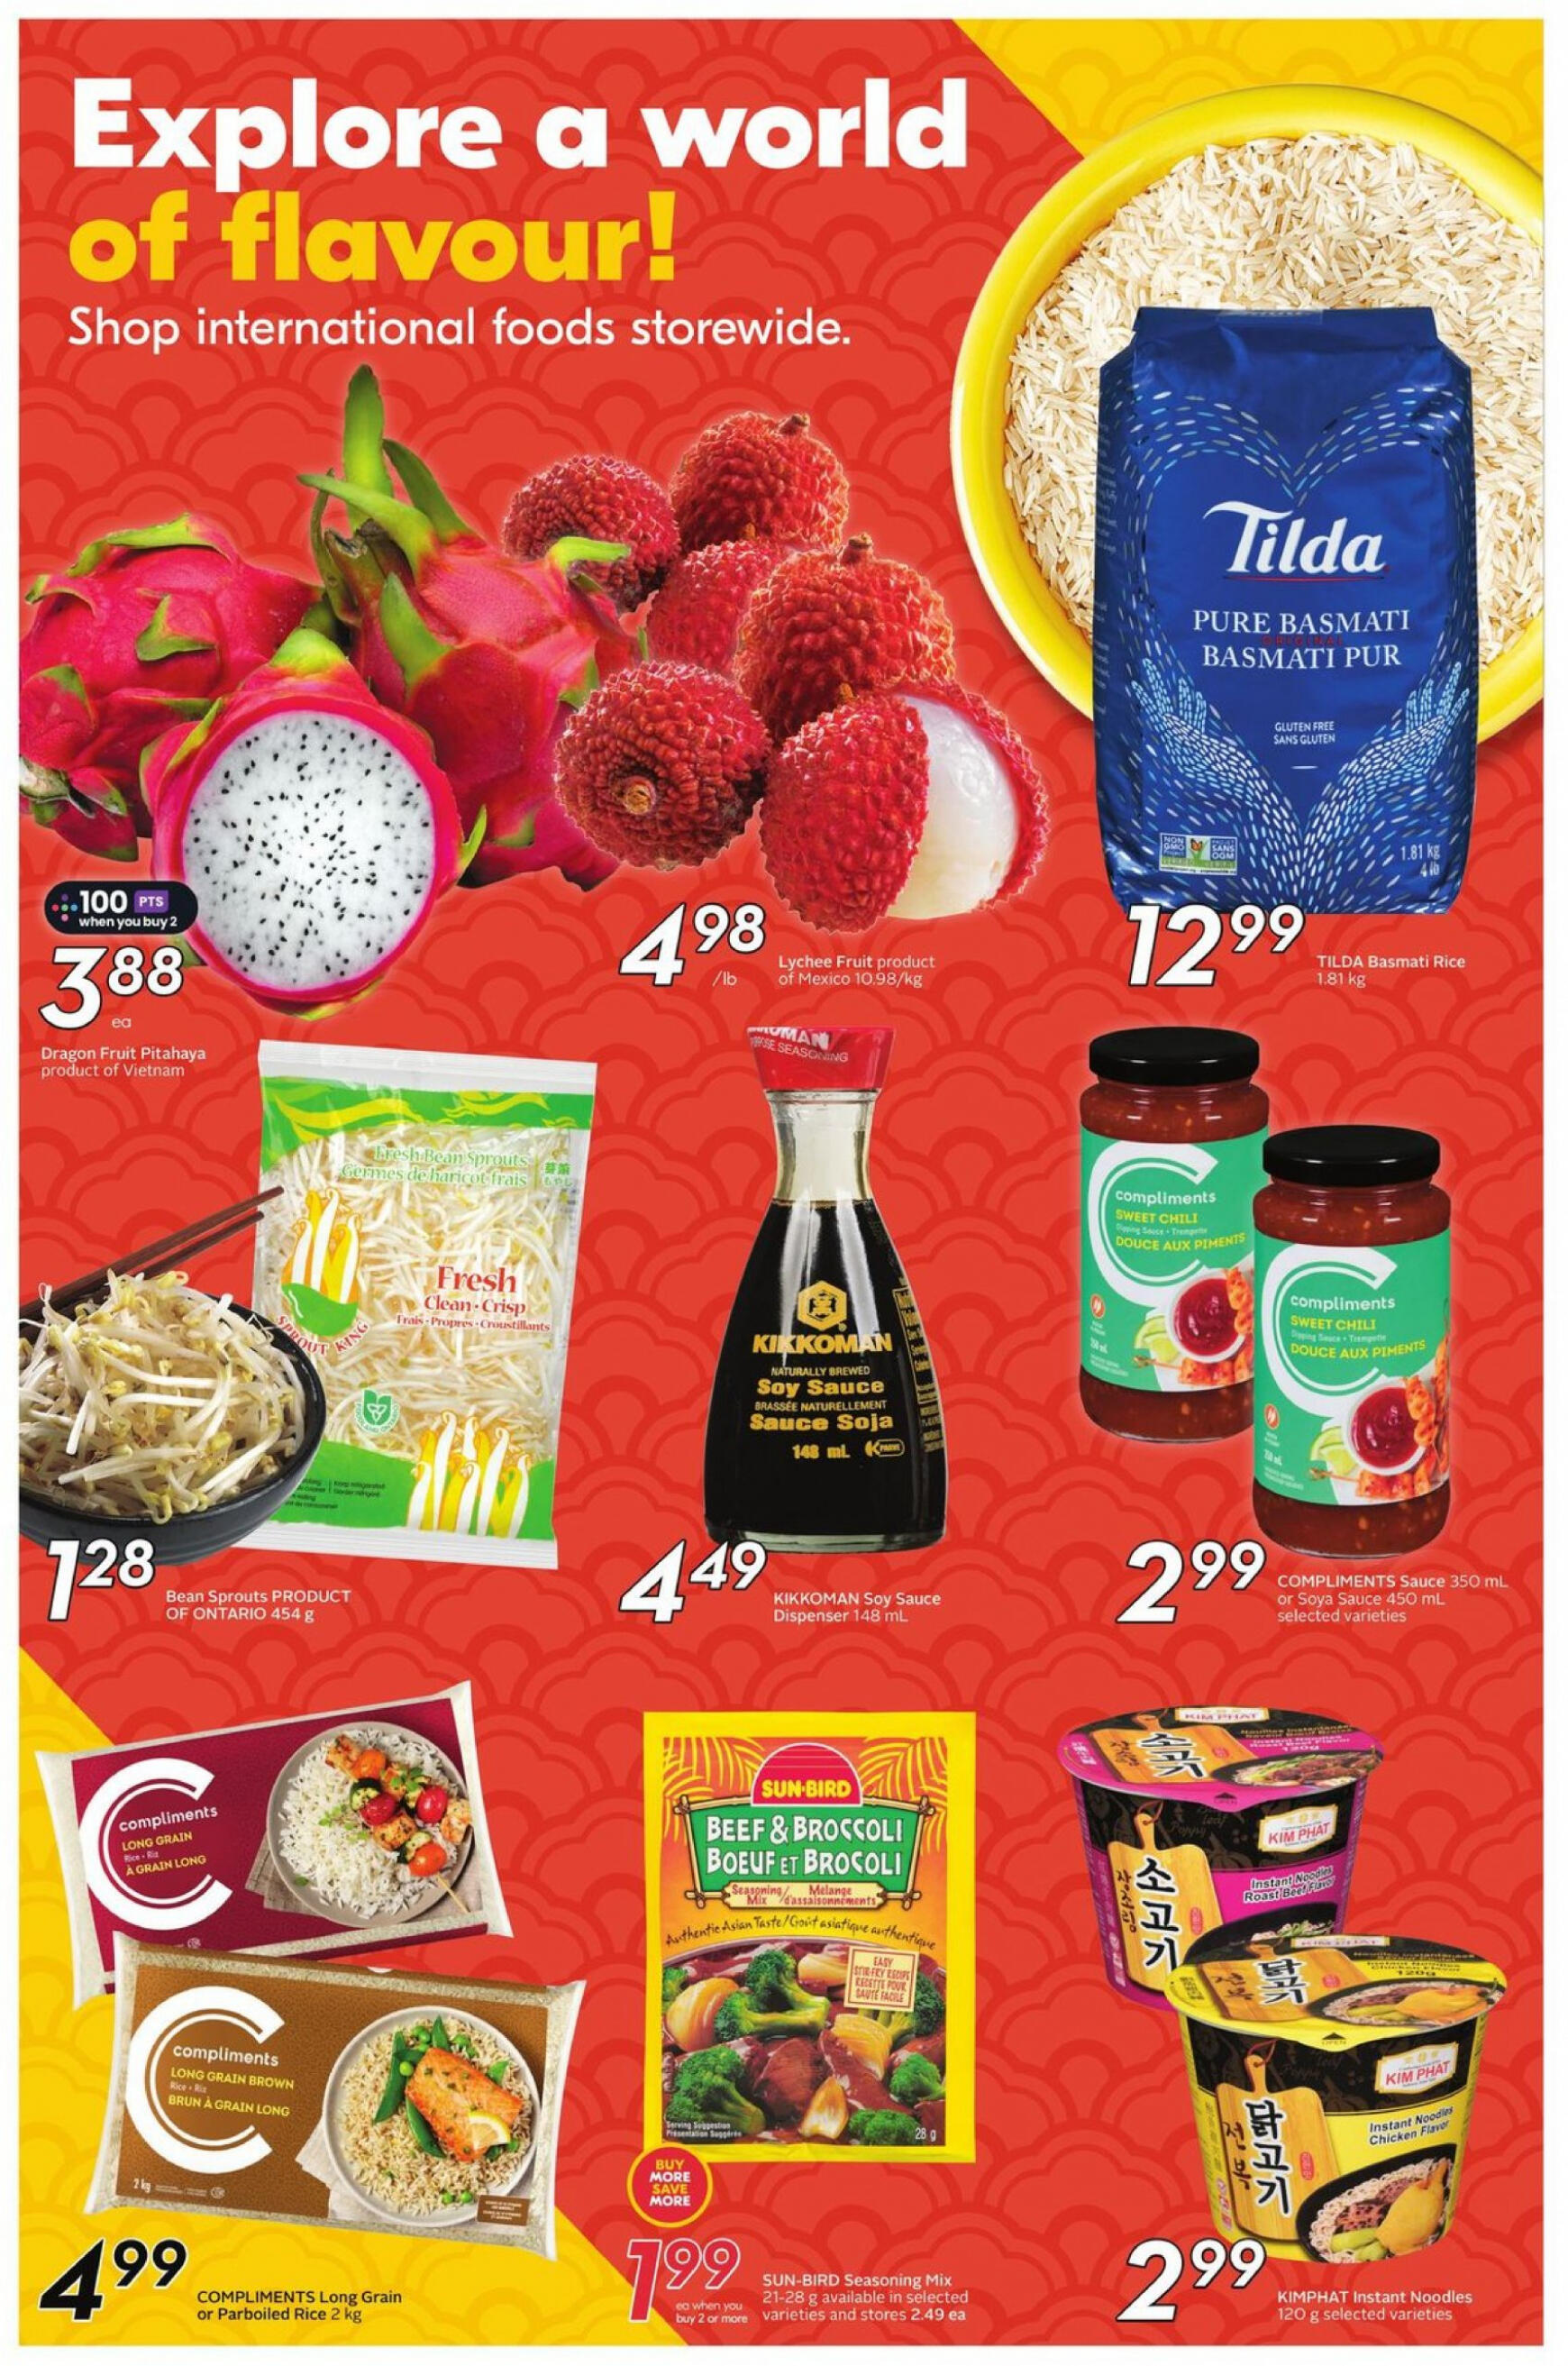 sobeys - Sobeys - Weekly Flyer - Ontario flyer current 06.06. - 12.06. - page: 15